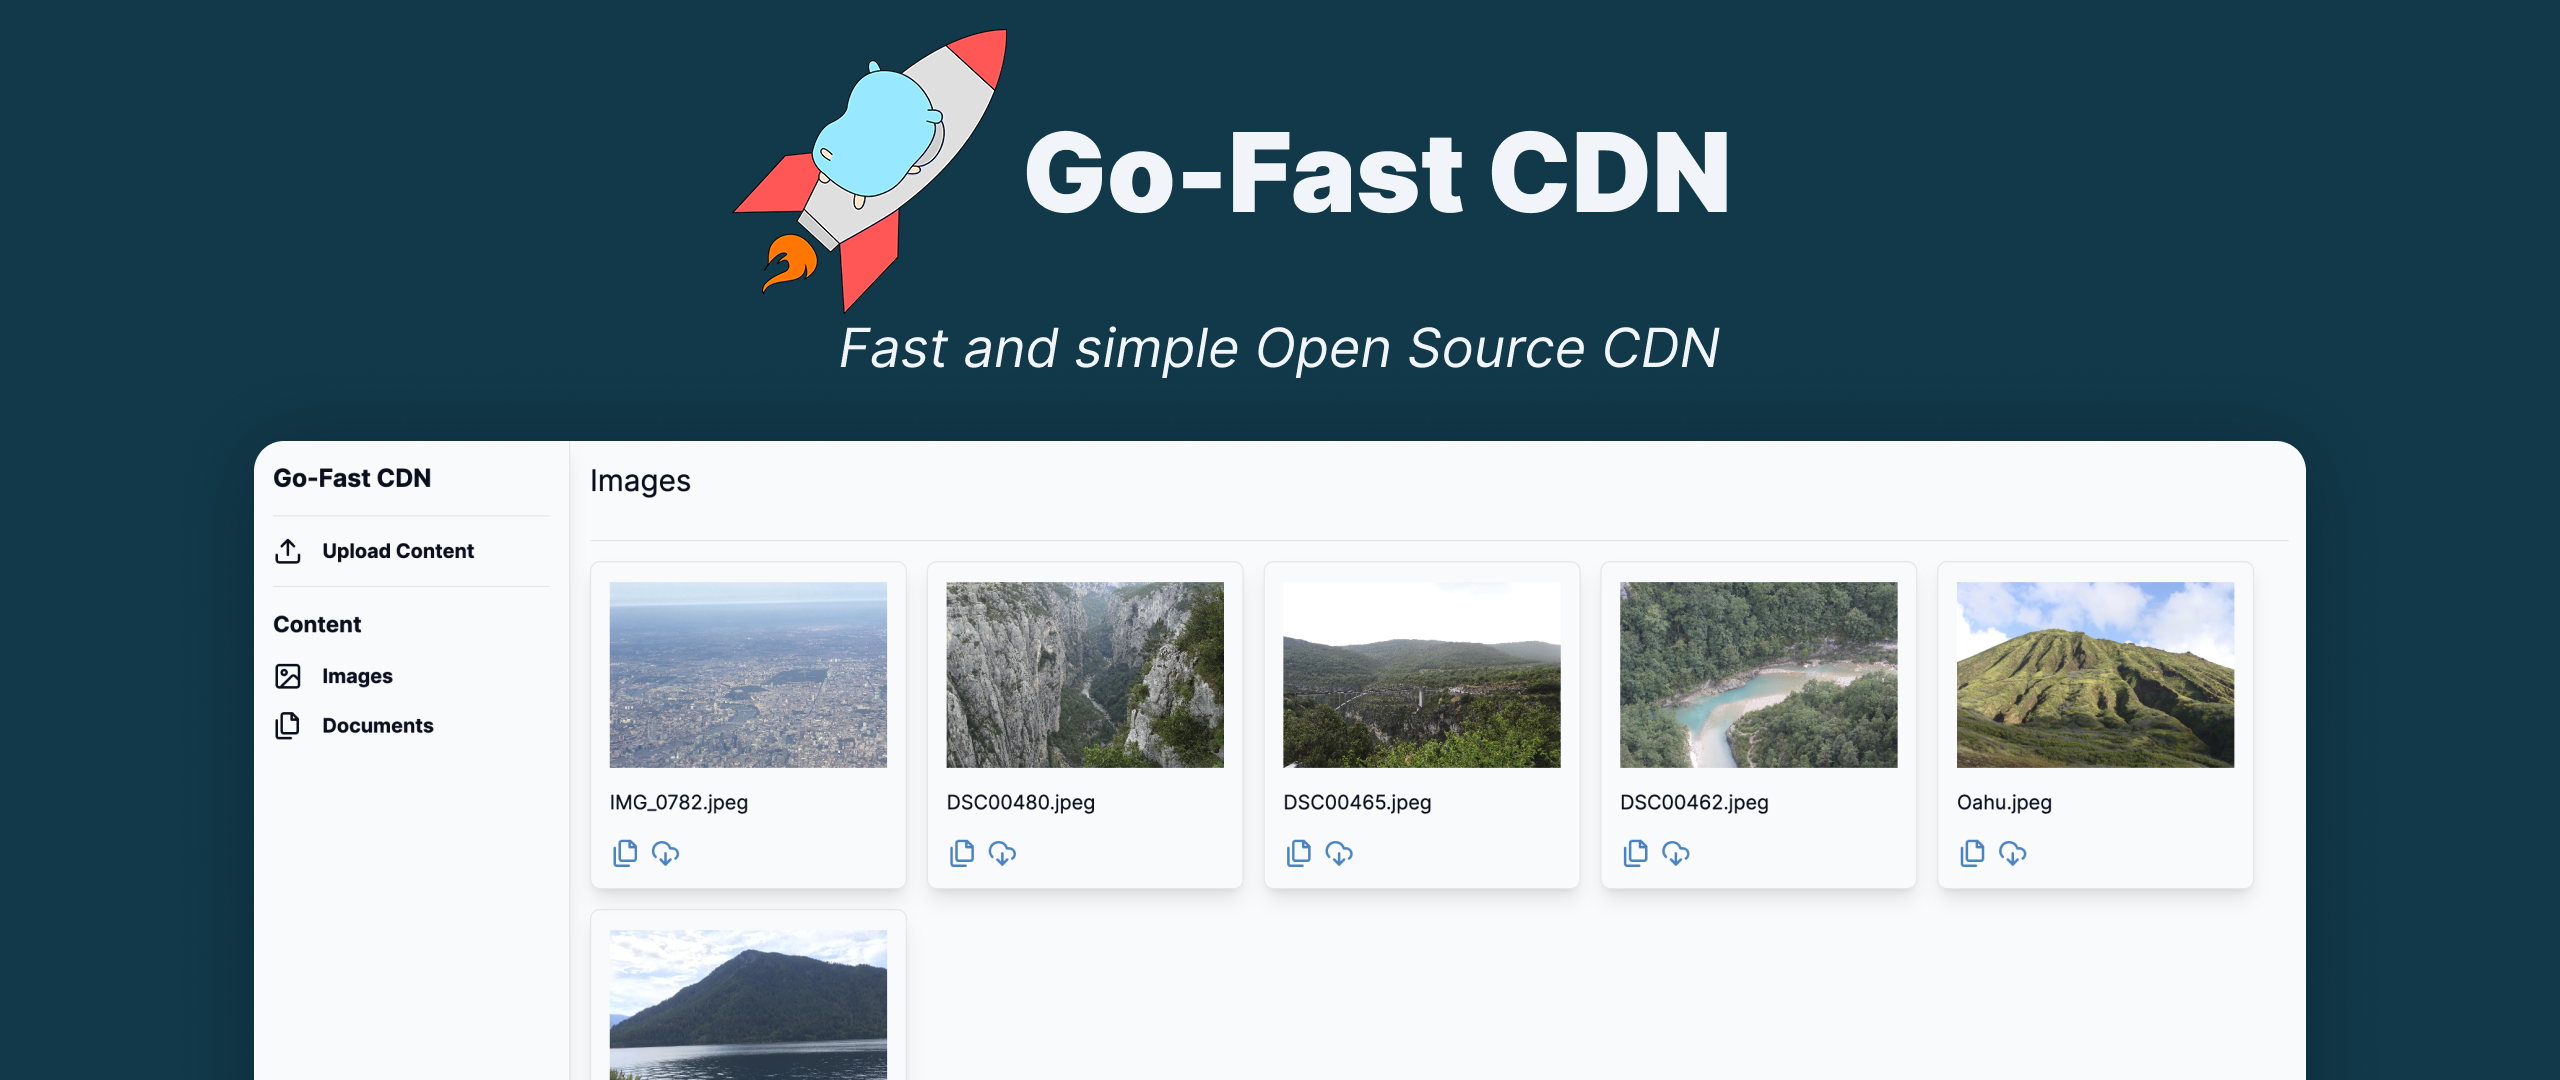 Go-Fast CDN - Fast and simple Open Source CDN